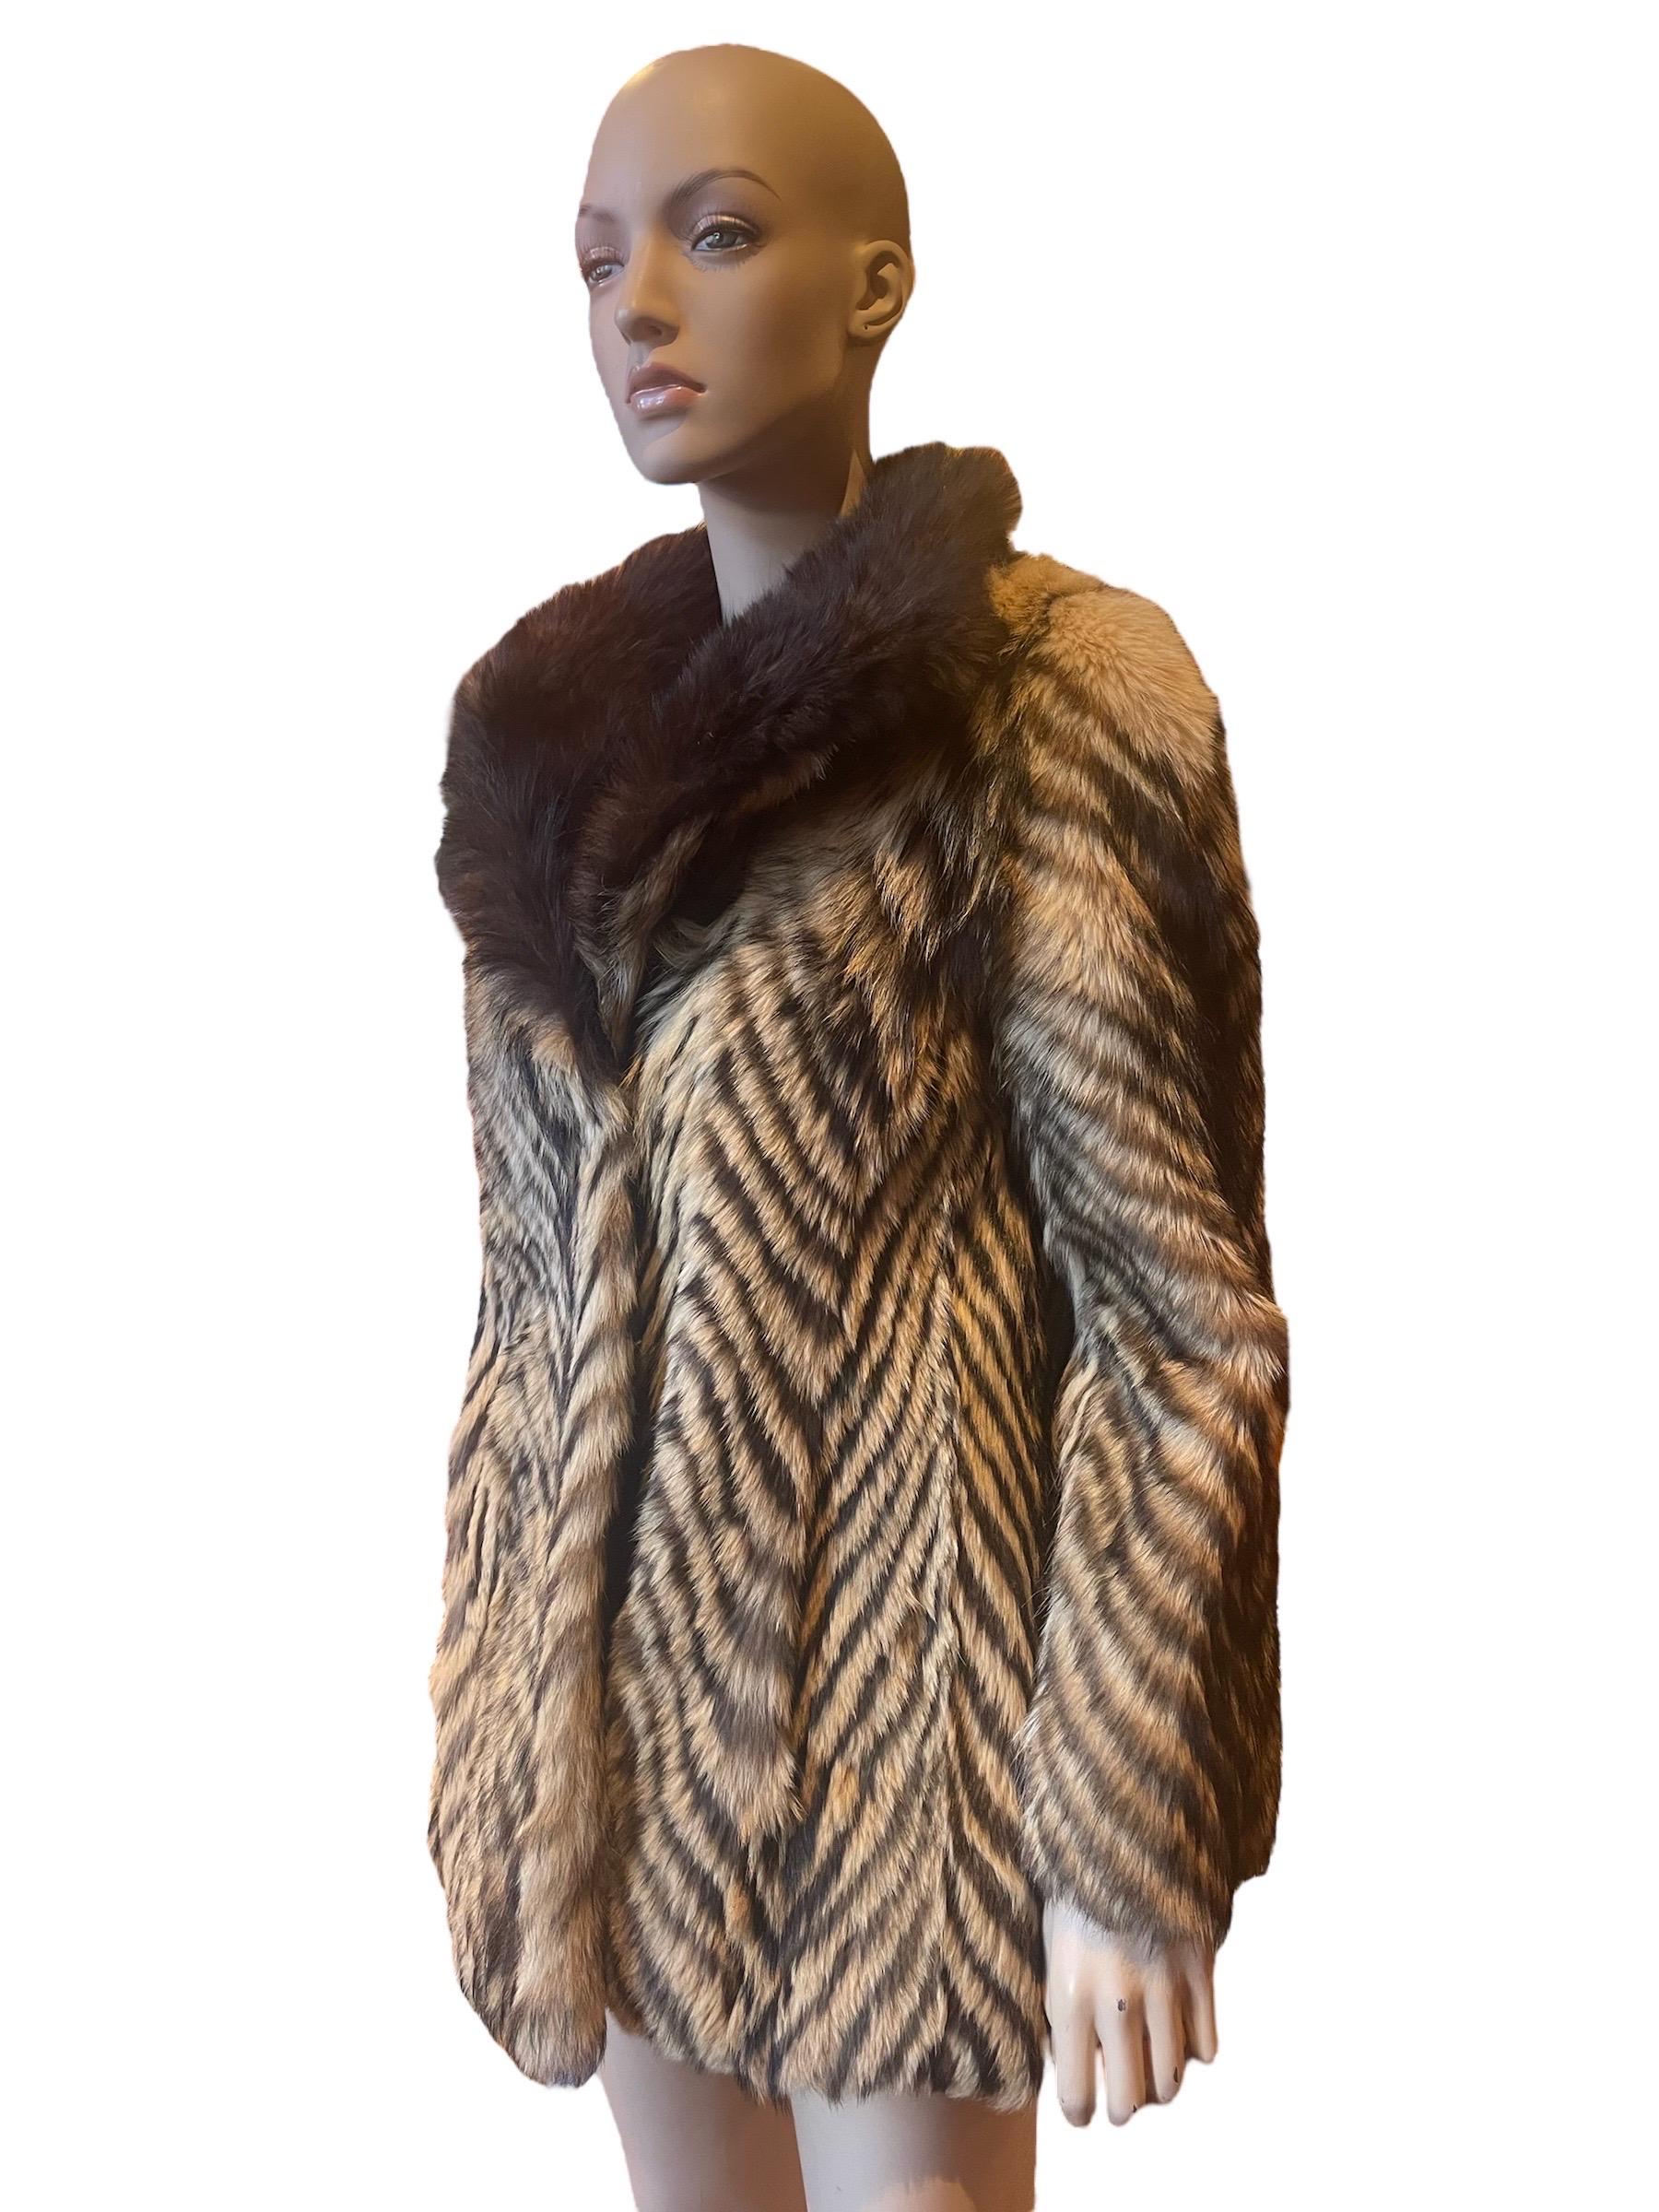 1980s Raccoon Fur Jacket With Dyed Fur Stripes  In Good Condition For Sale In Greenport, NY